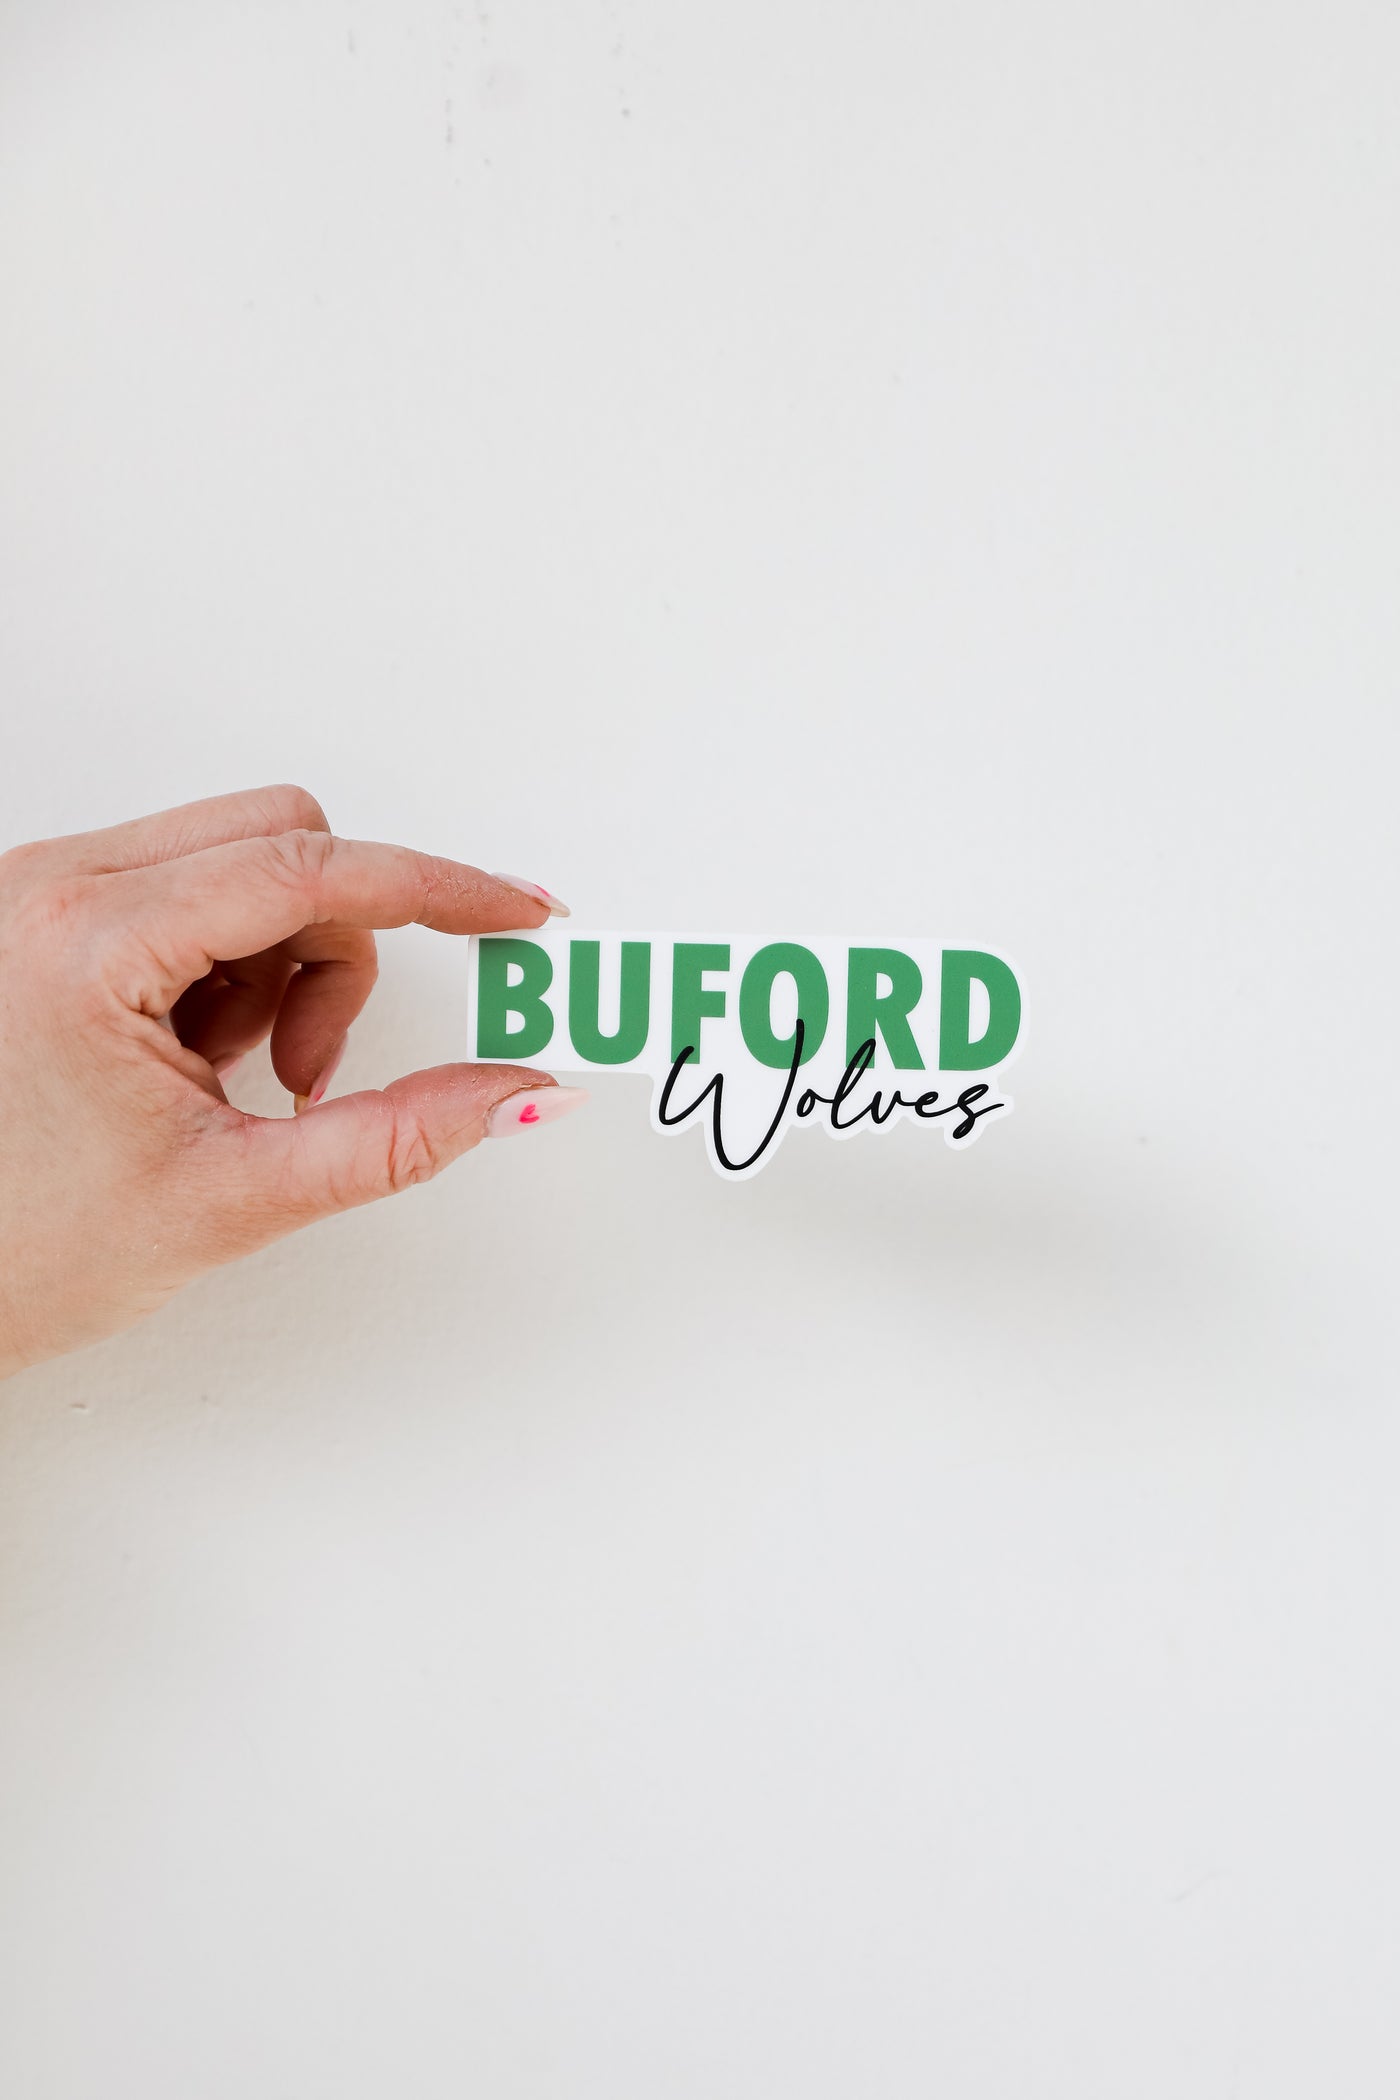 Buford Wolves Sticker close up